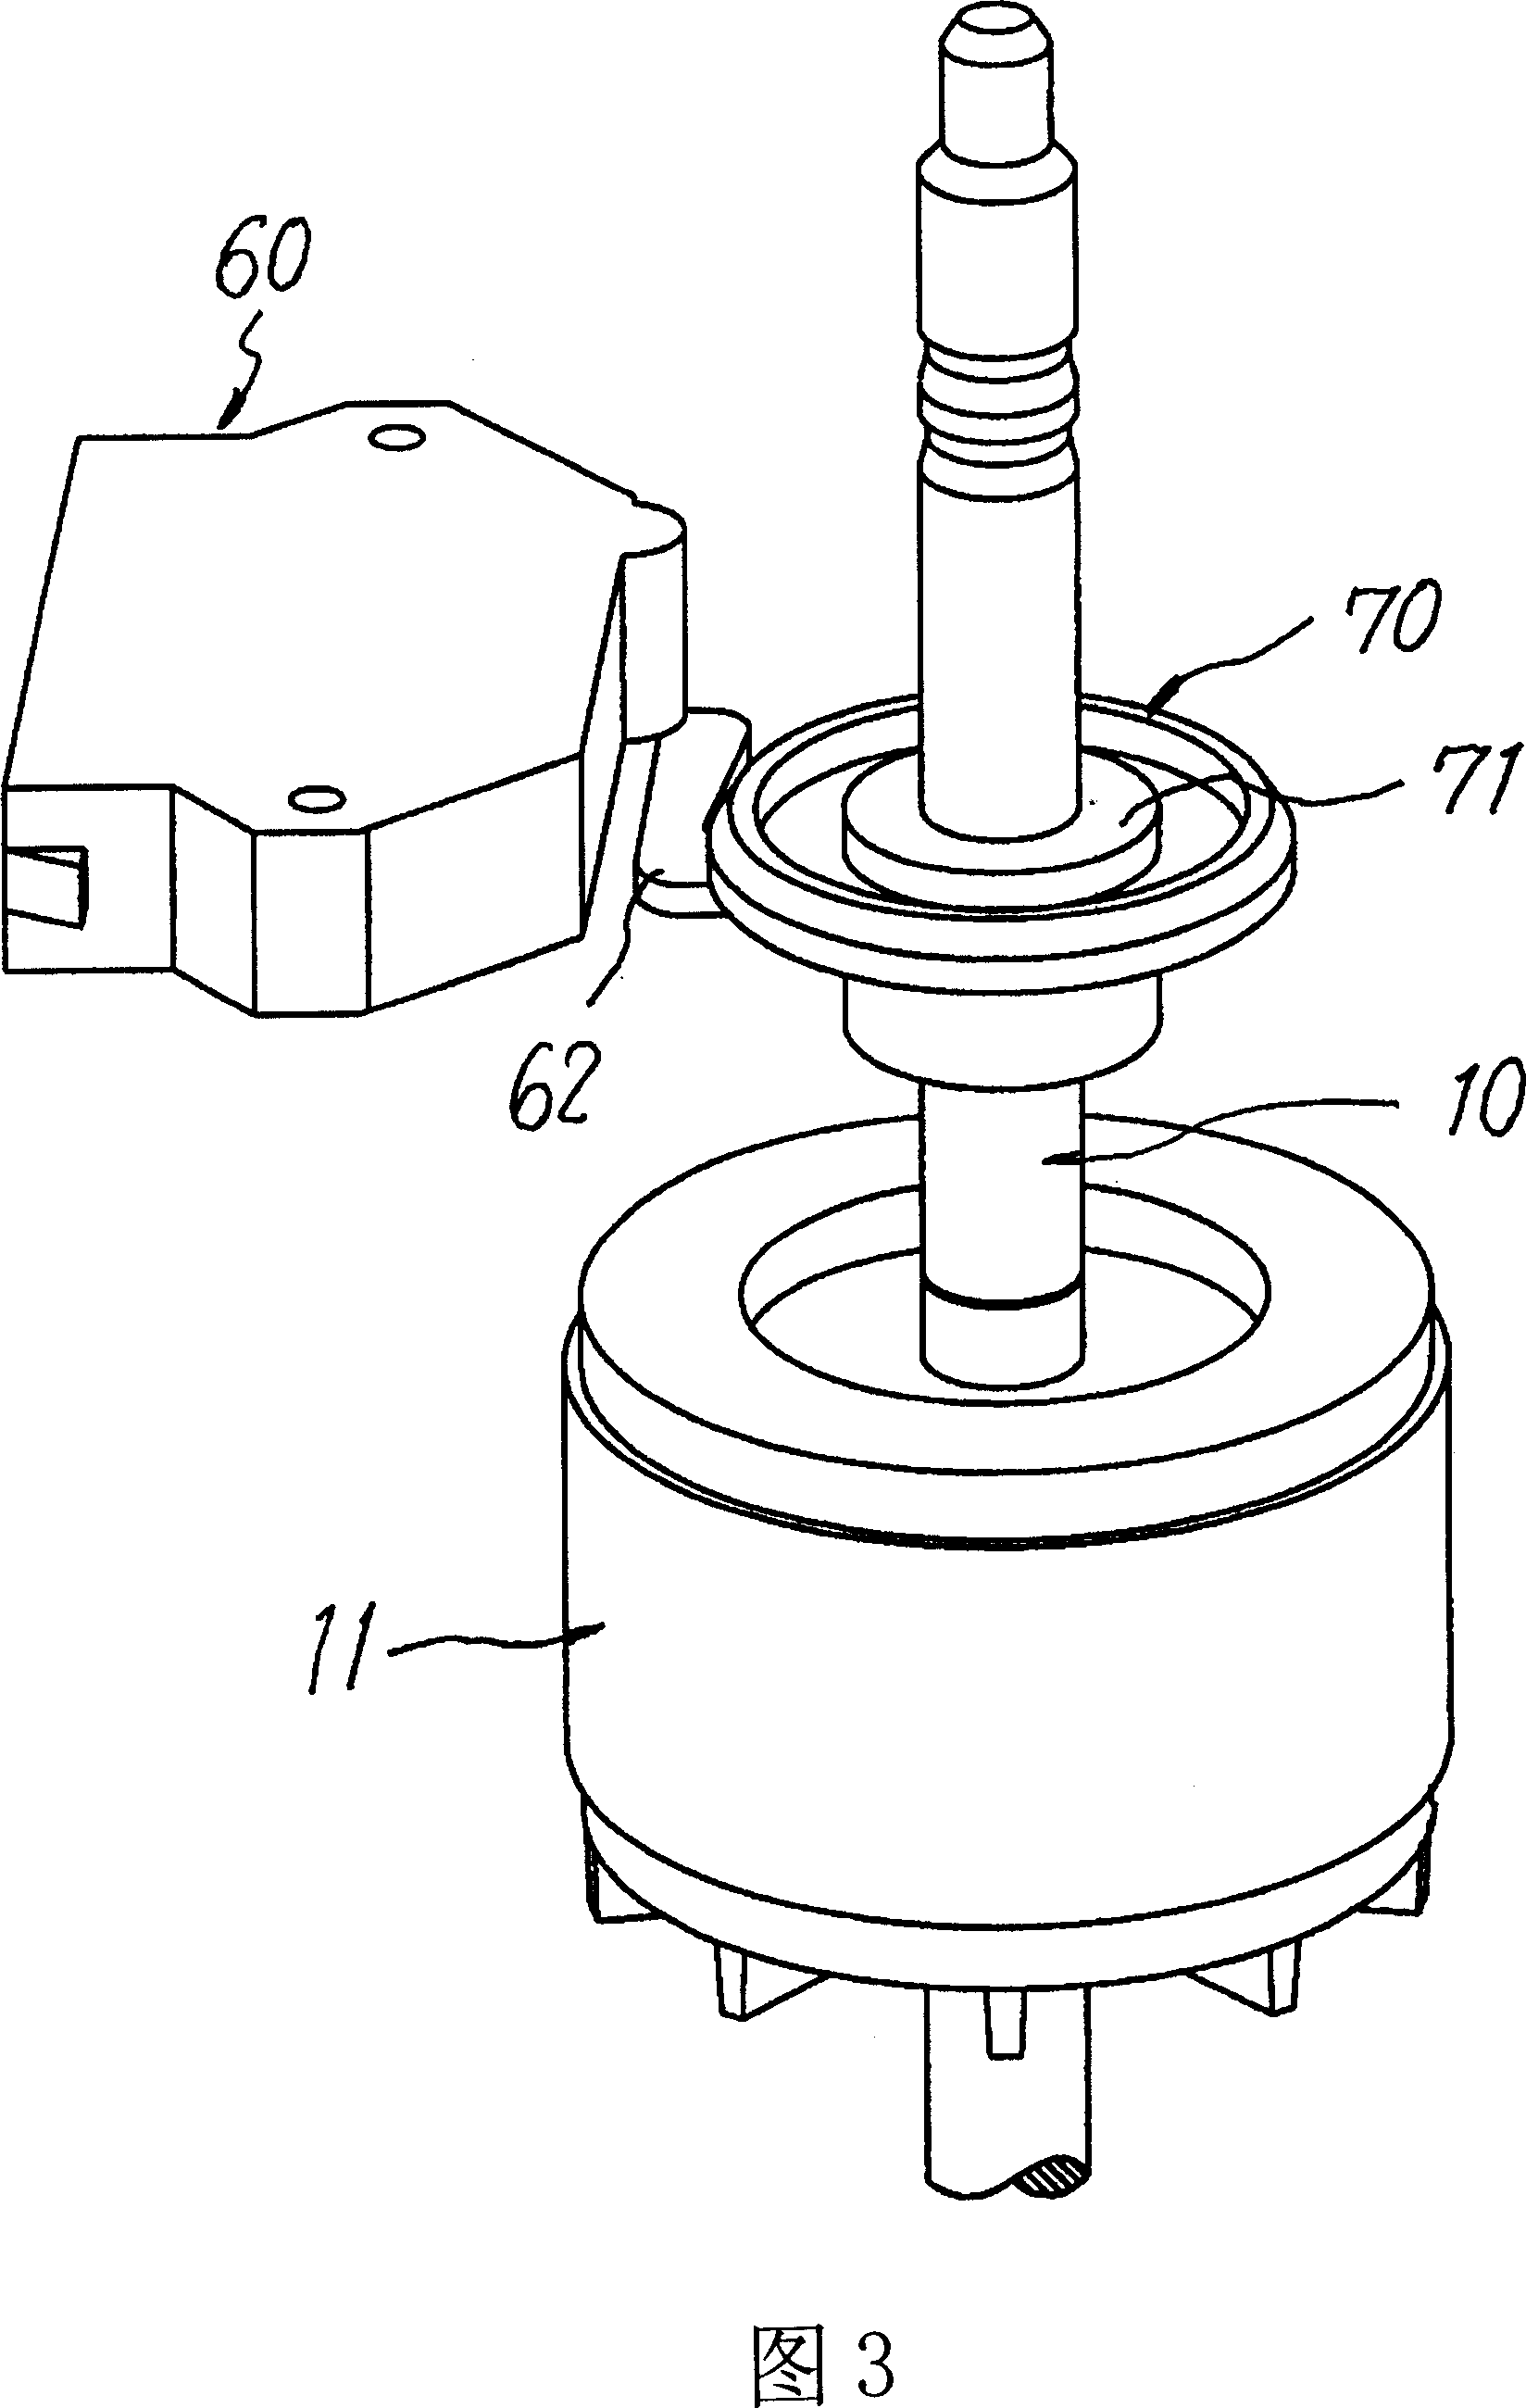 Centrifugal switch driver for single-phase inductive motor